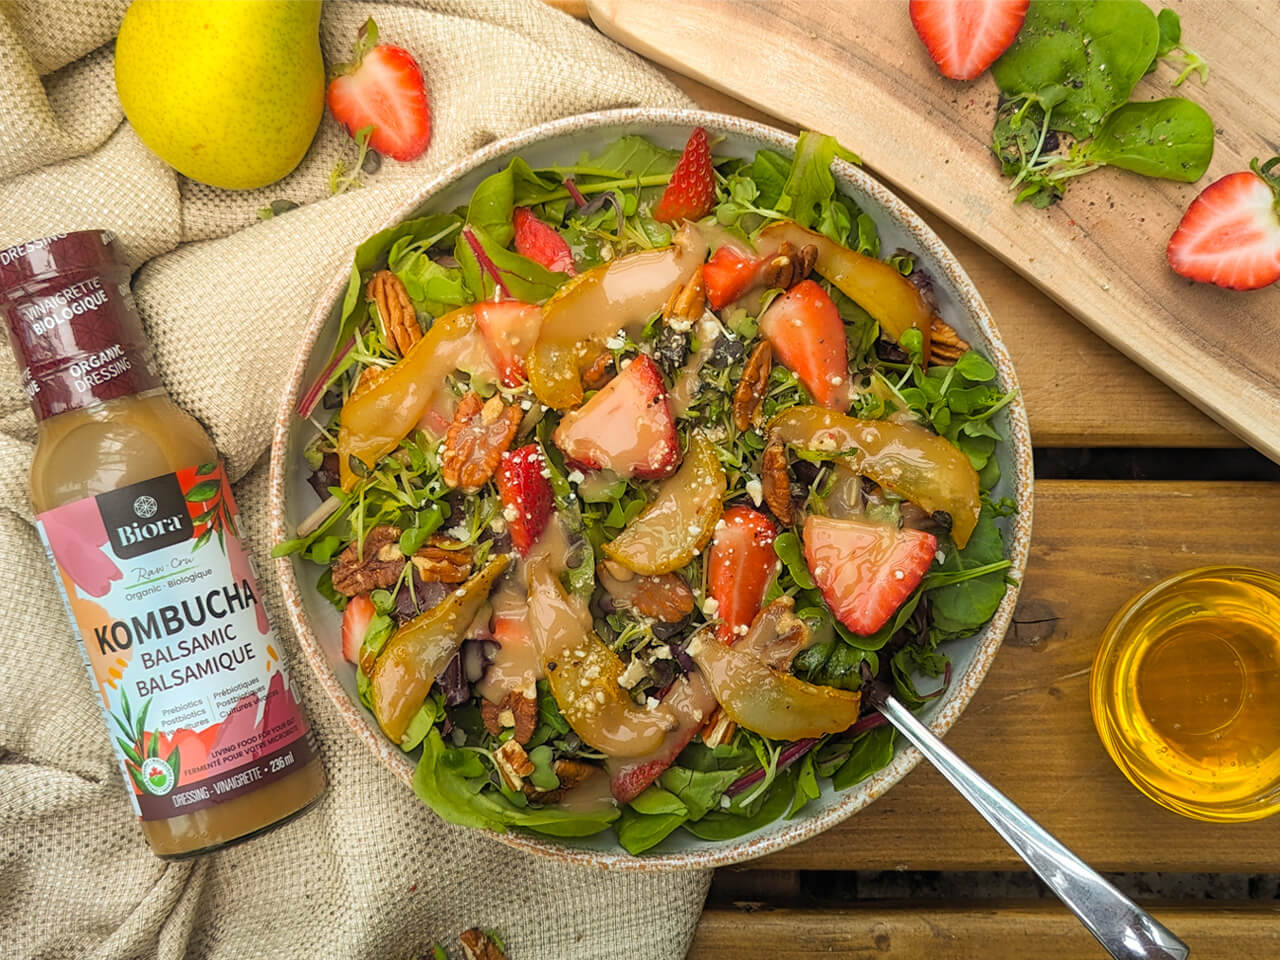 Strawberry and Pear Salad with Balsamic Dressing Recipe